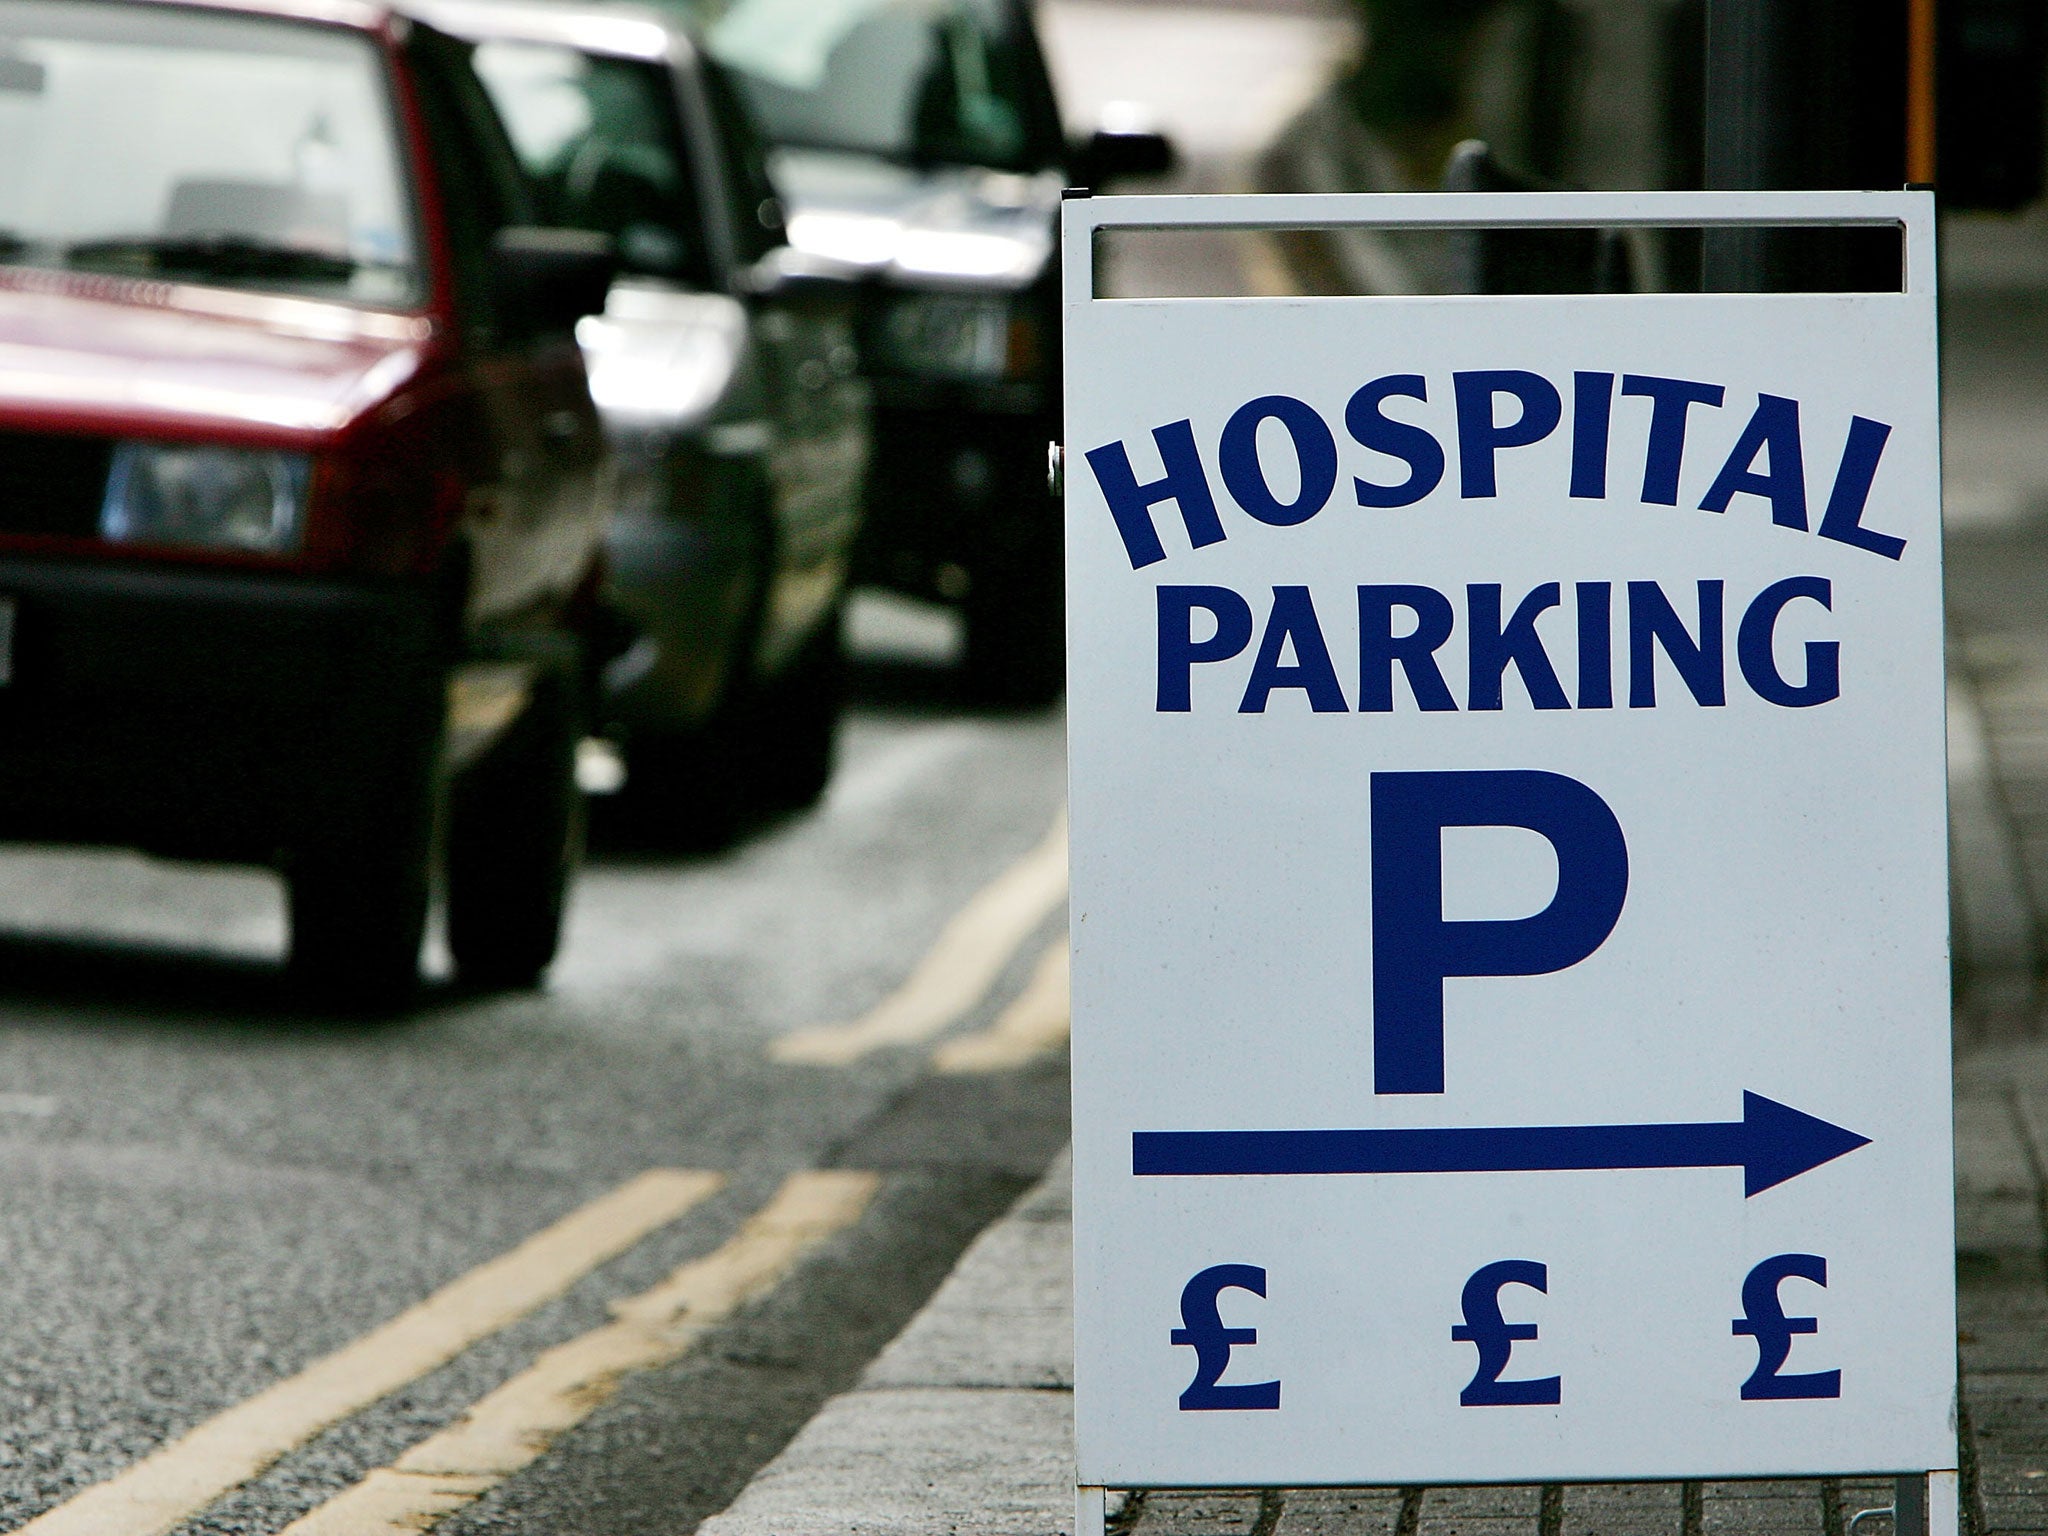 Seven NHS trusts made £3m from parking fees in 2014-15